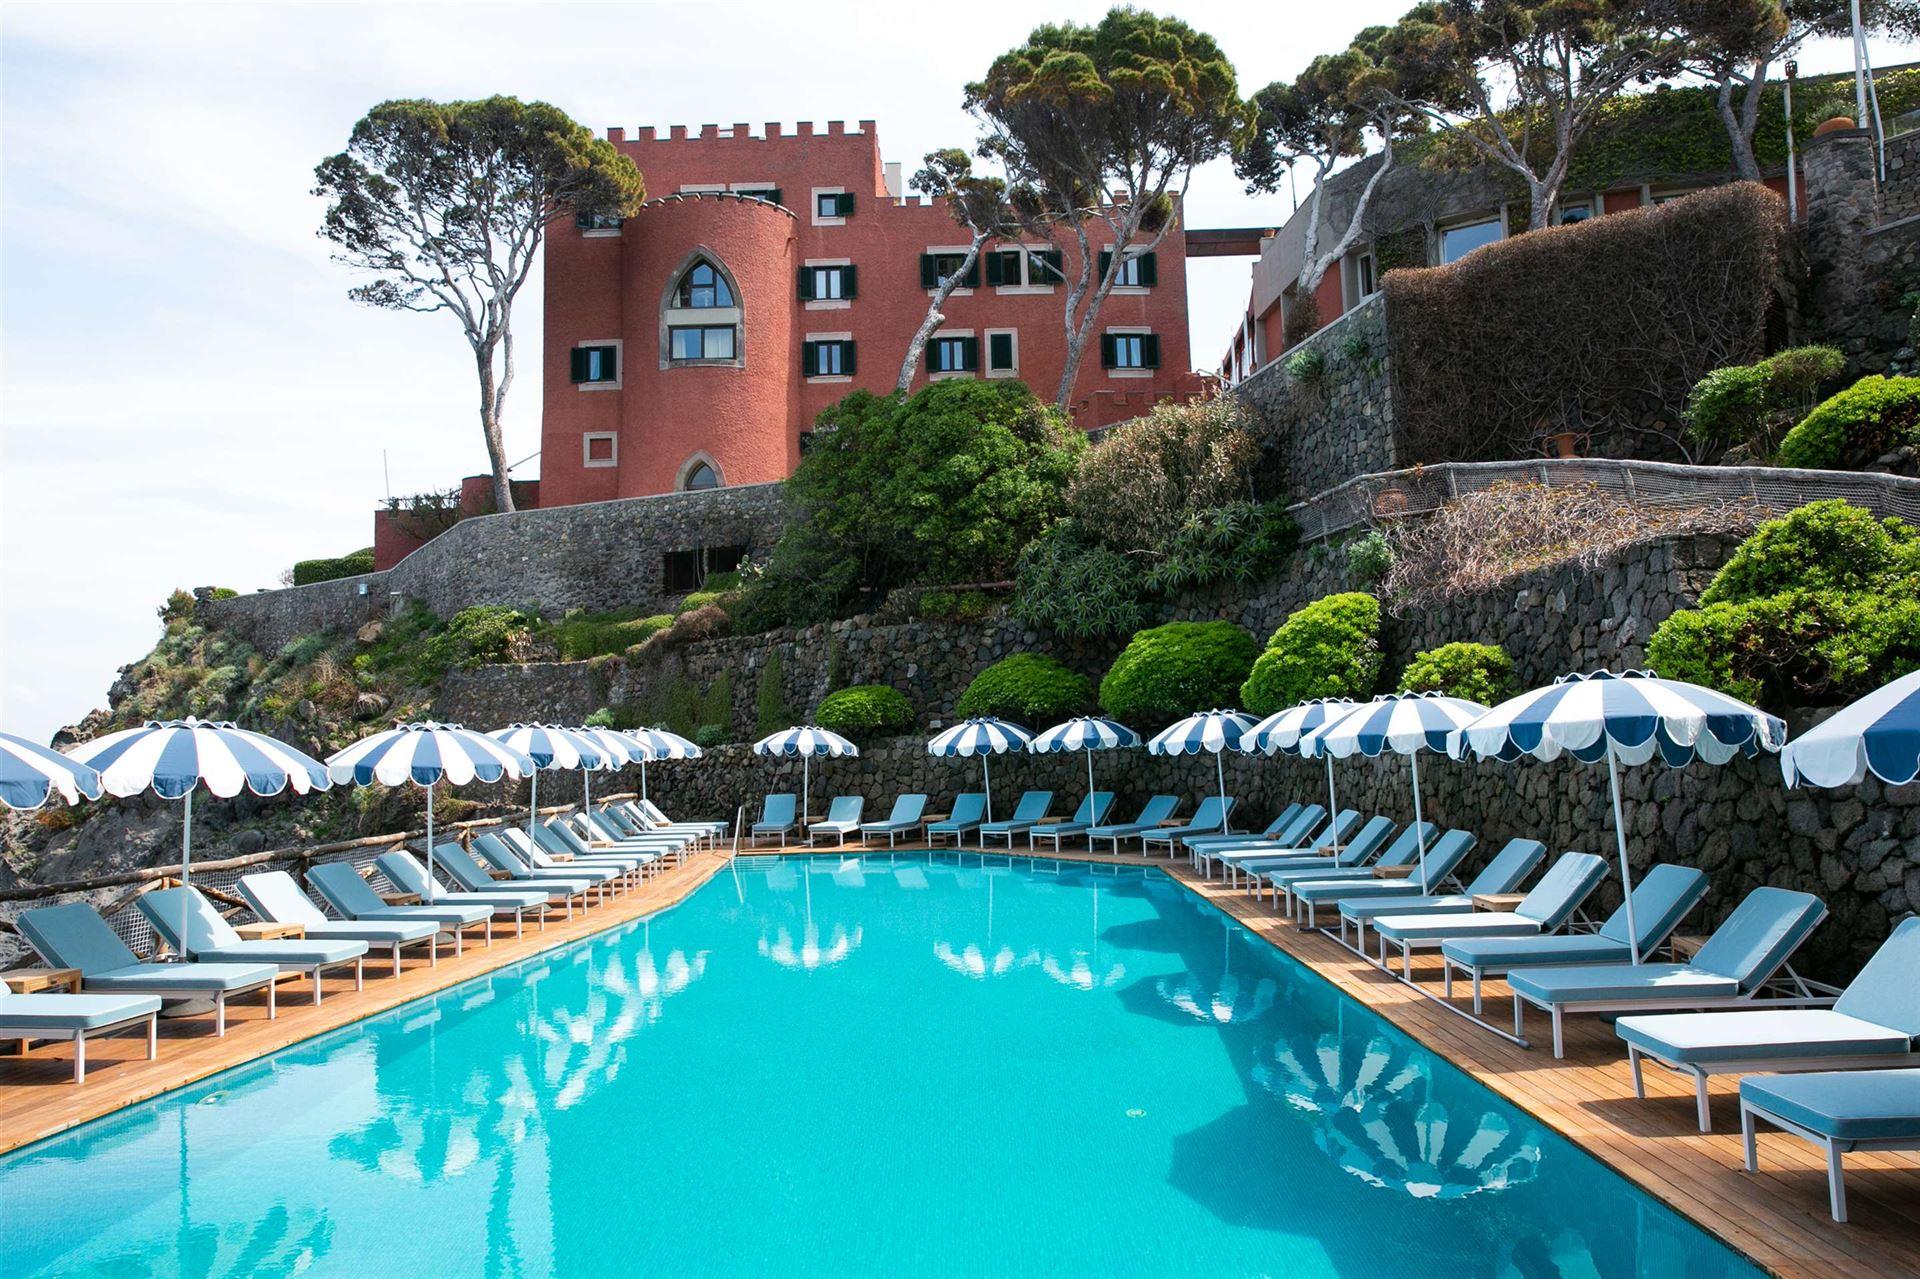 Mezzatorre Hotel & Thermal Spa luxe hotel deals